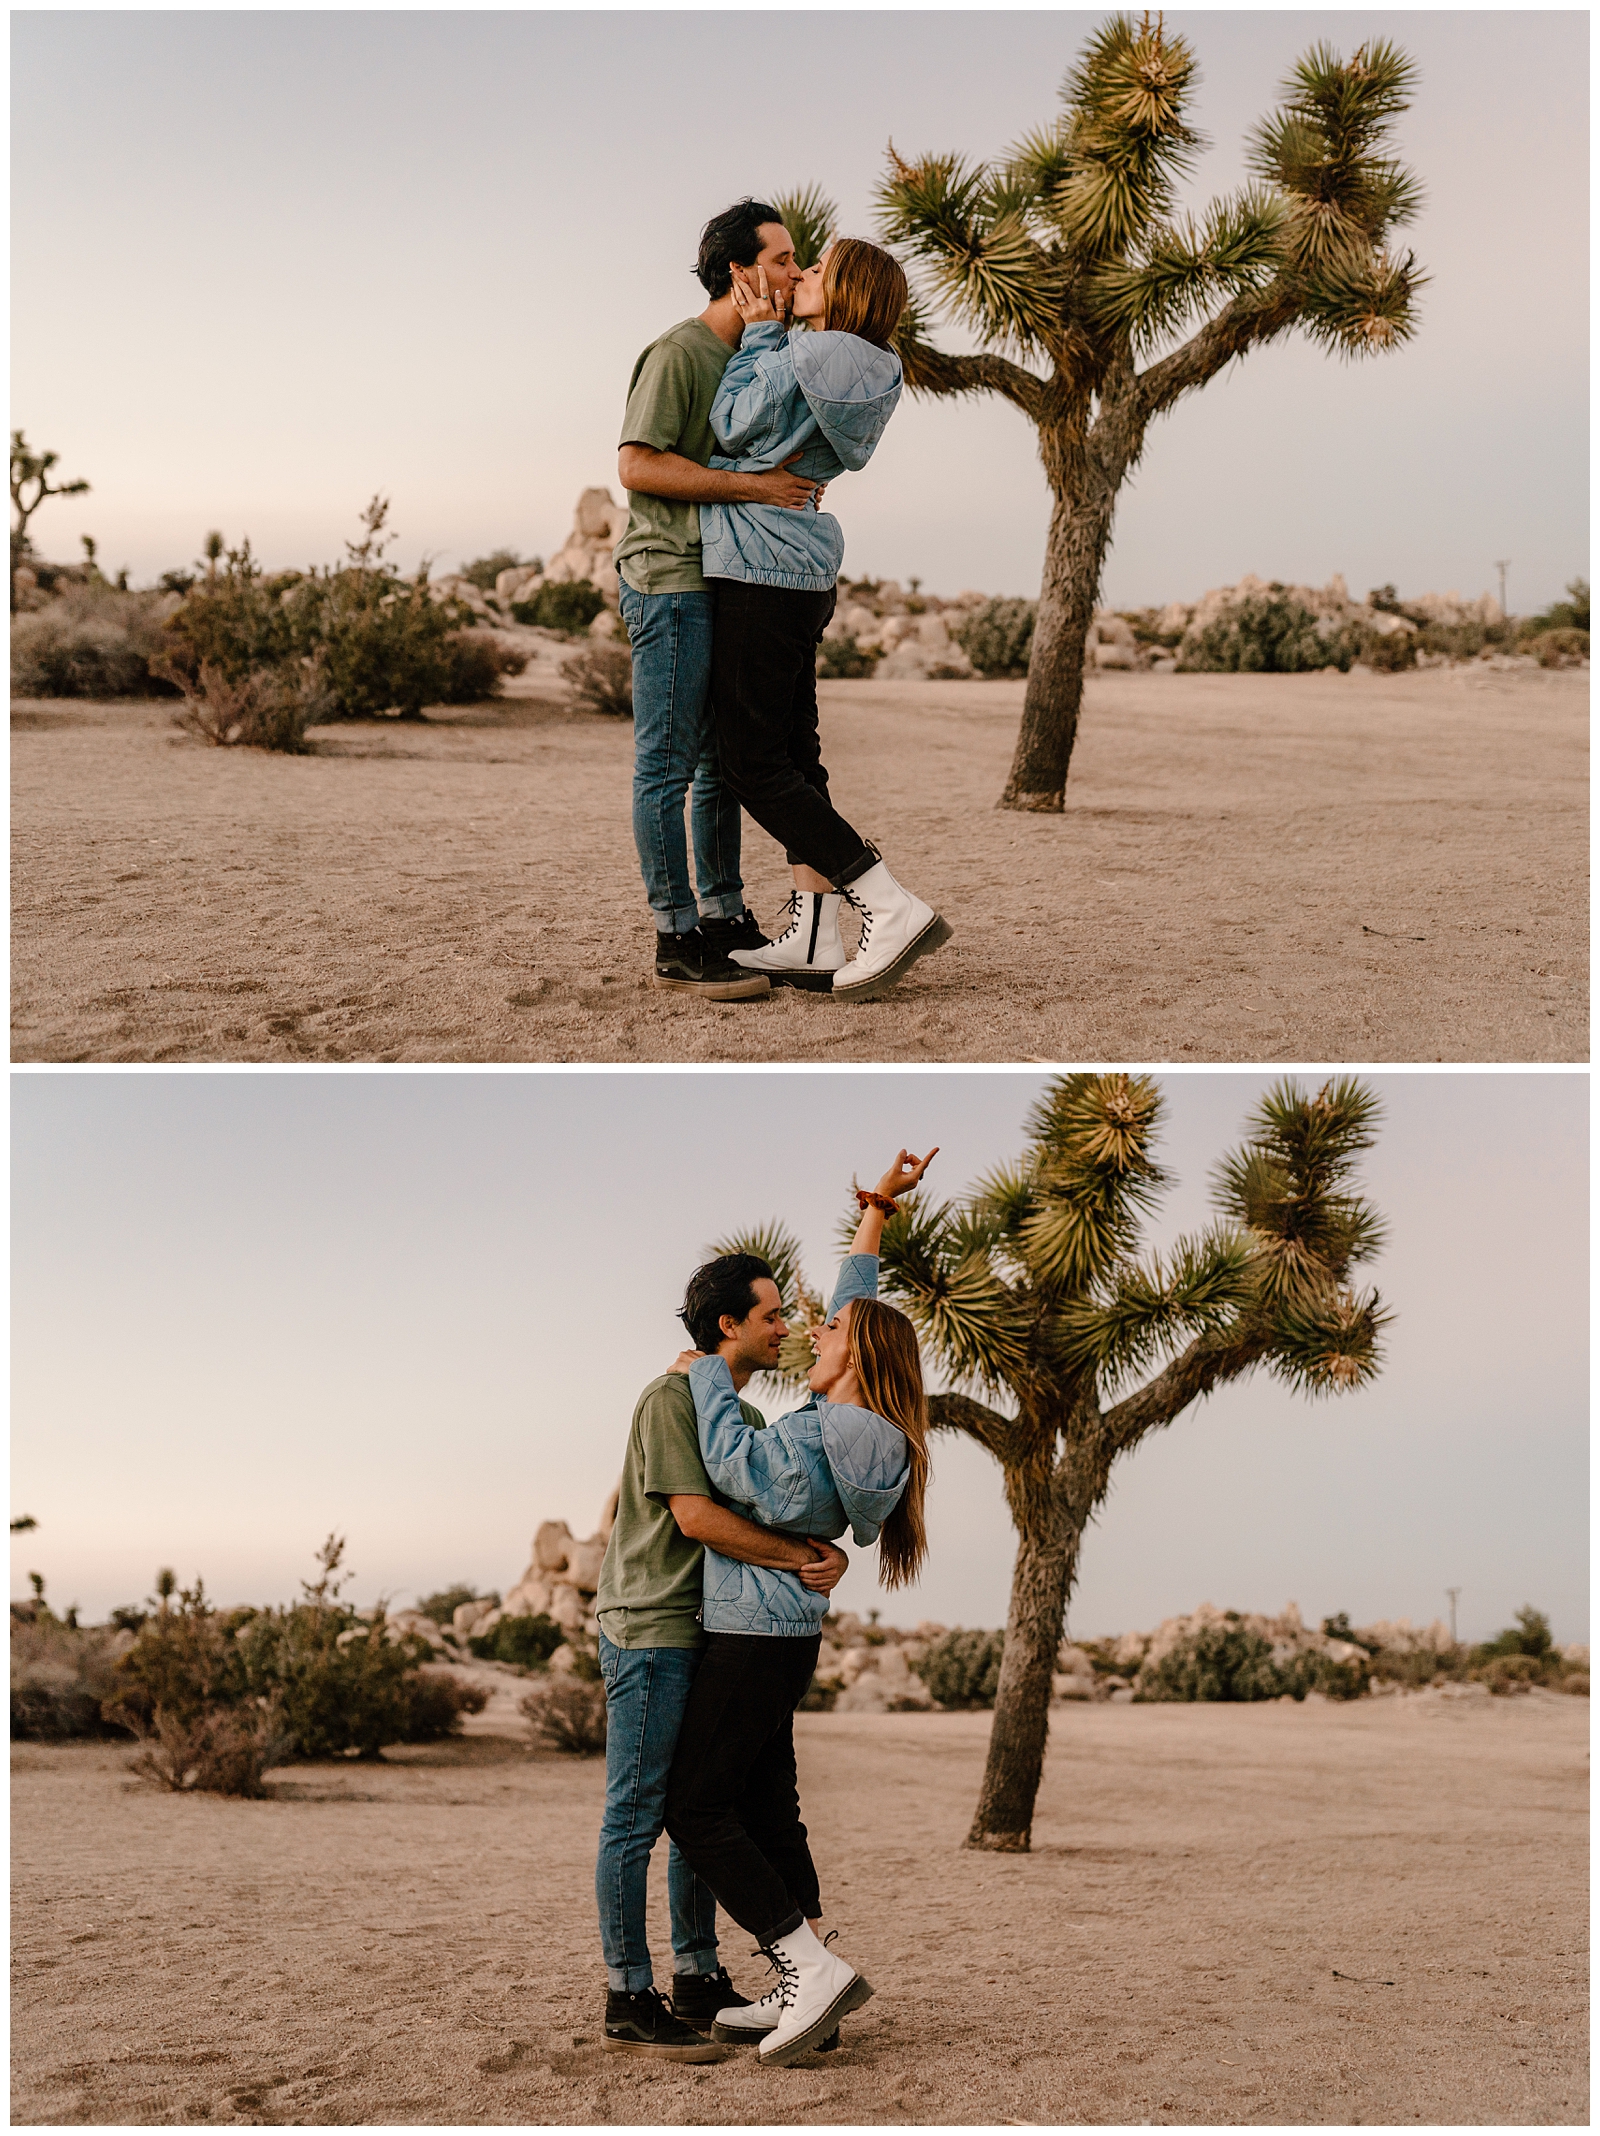 Ending their wild Joshua Tree couple's session with kisses at sunset